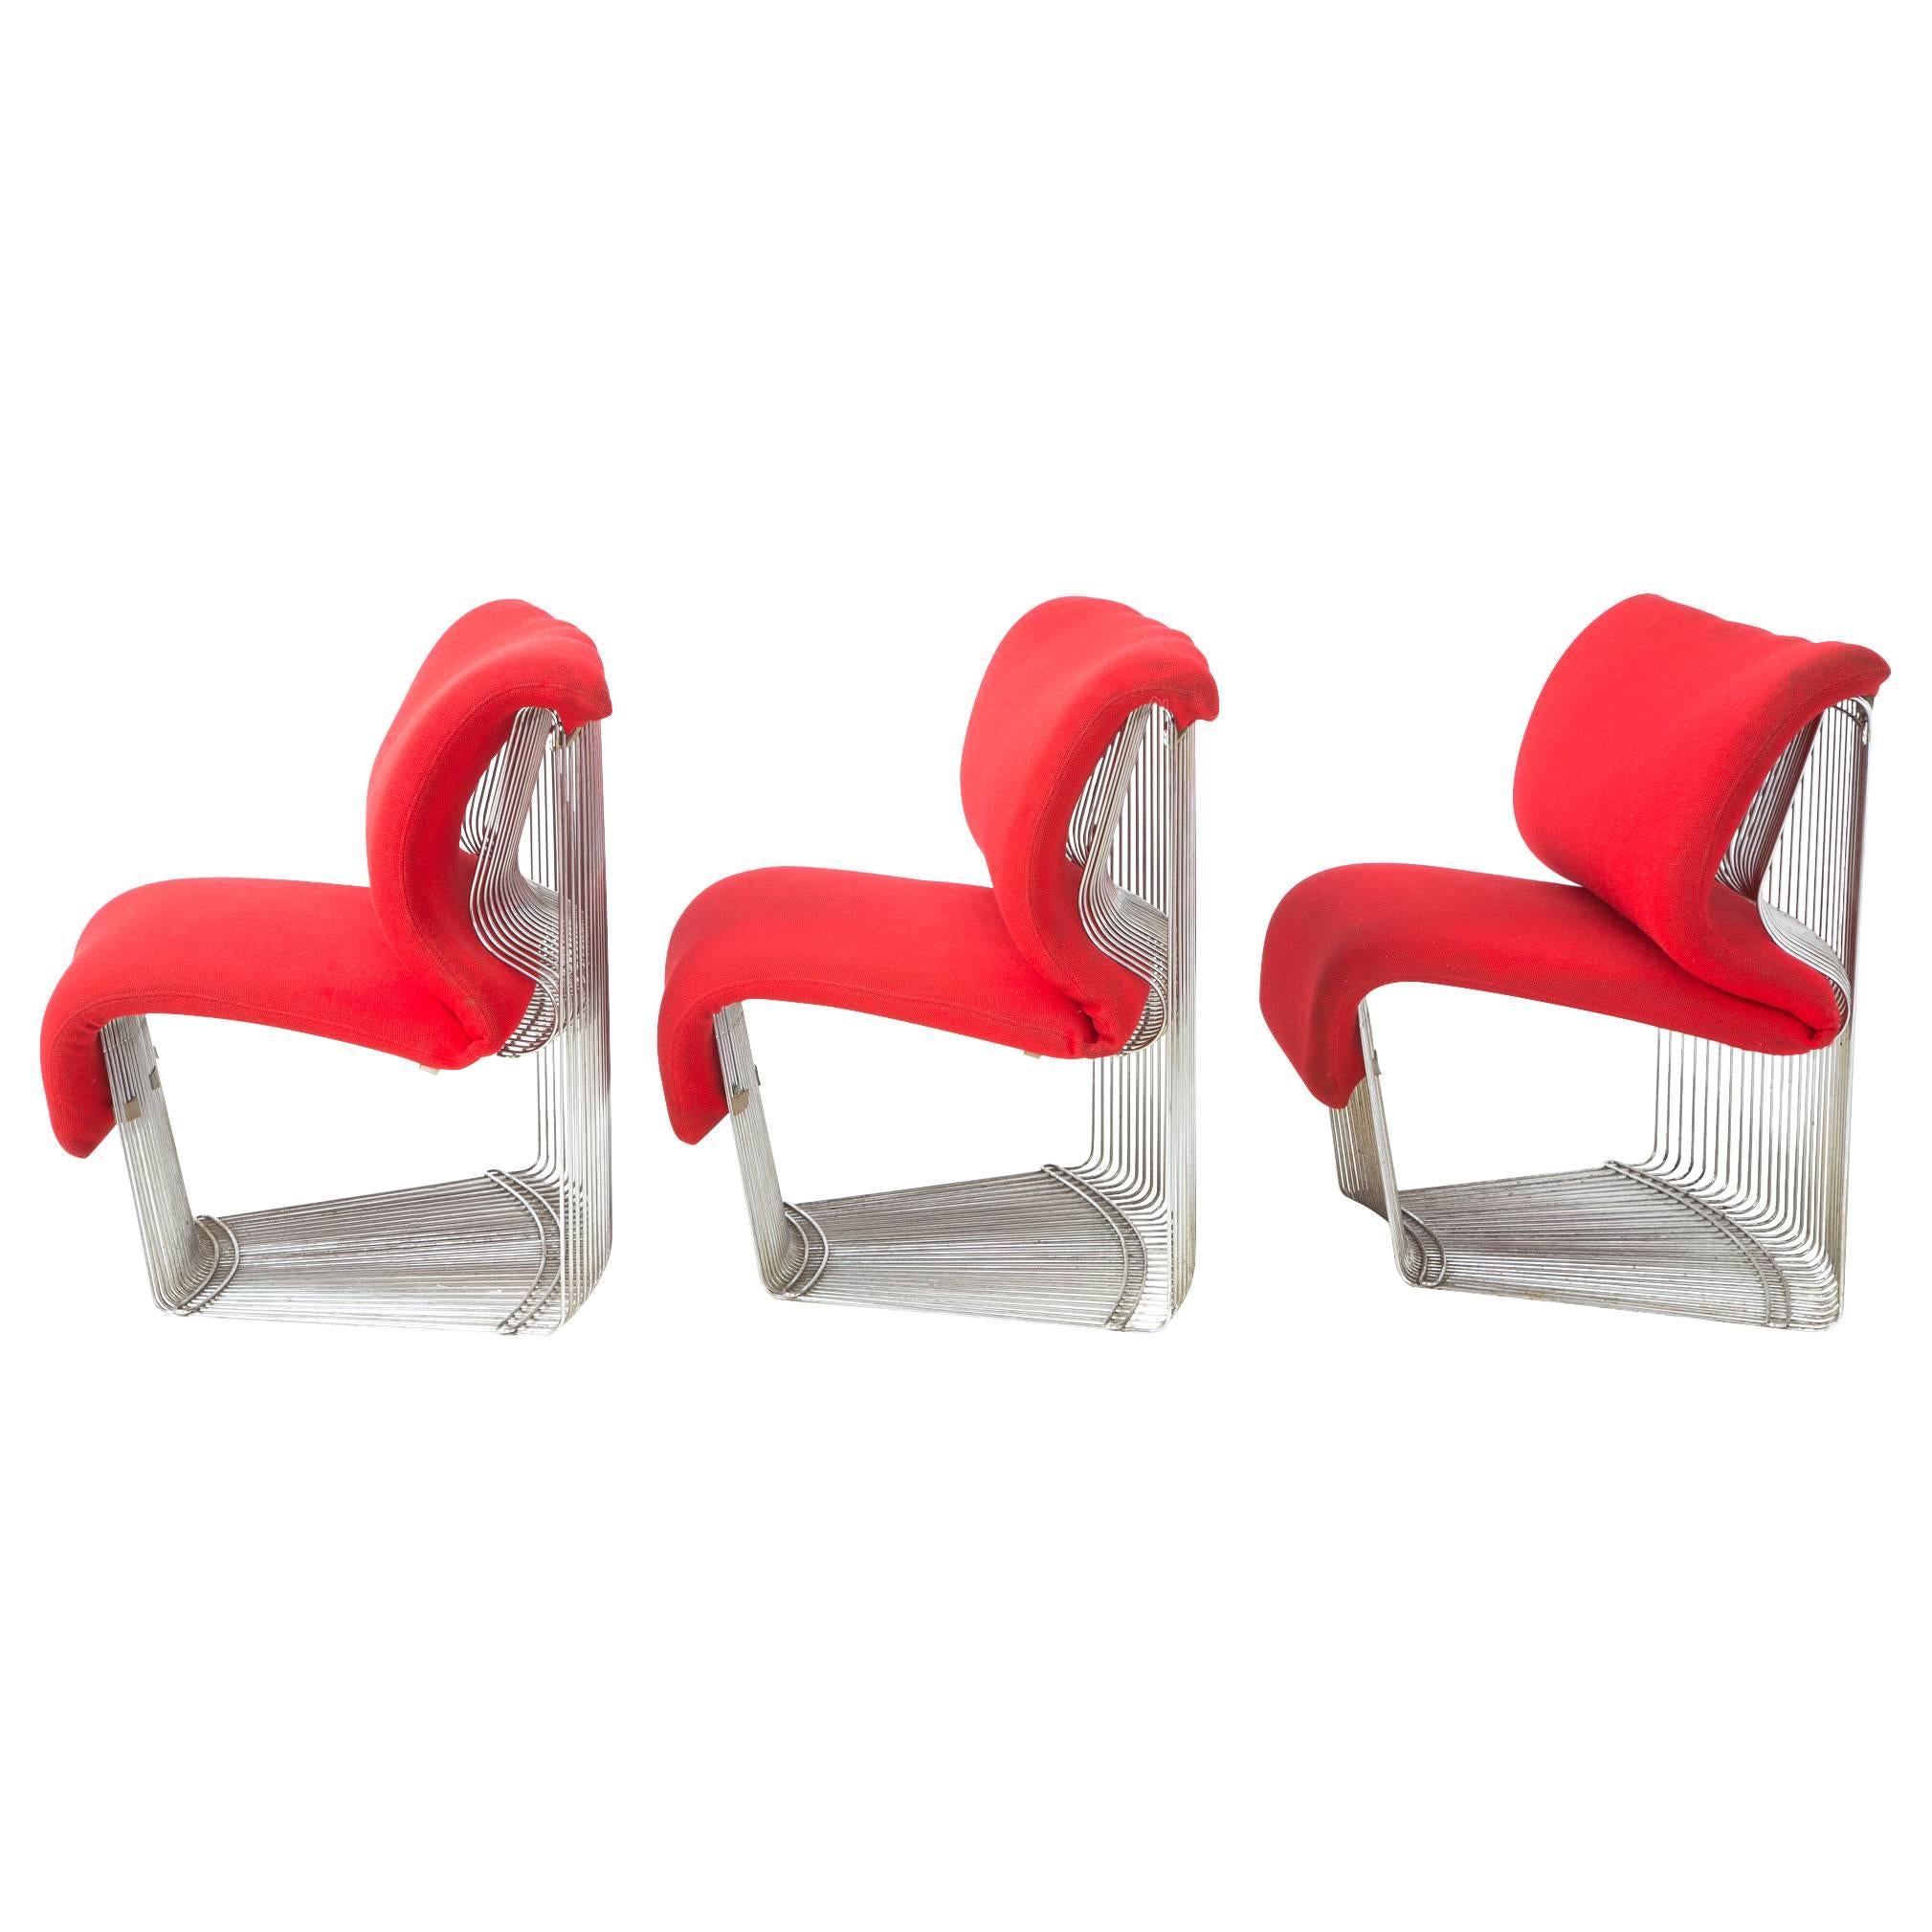 This iconic set of three chairs and ottoman was designed by Verner Panton for the exquisite Varna restaurant of Arhus, DK in 1971. Apple red upholstery on the chairs is removable by velcro. Ottoman does not come upholstered. Chrome-plated steel rods